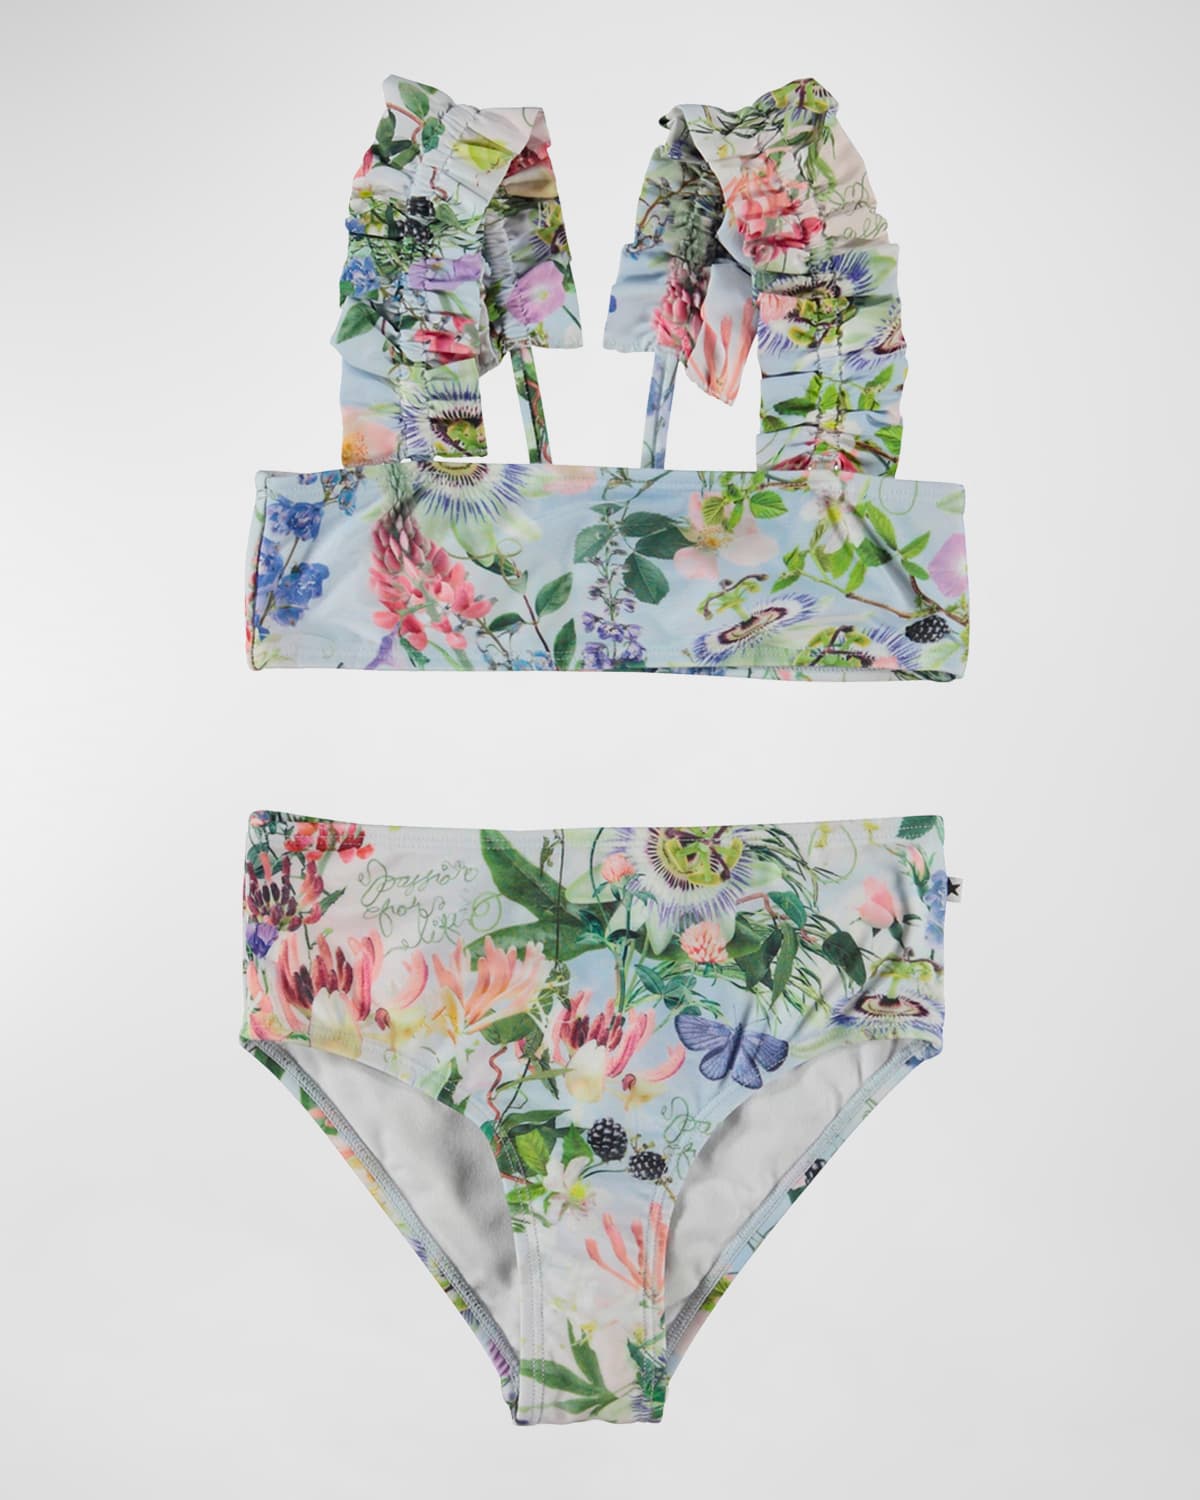 MOLO GIRL'S NICE FLORAL-PRINT TWO-PIECE SWIMSUIT